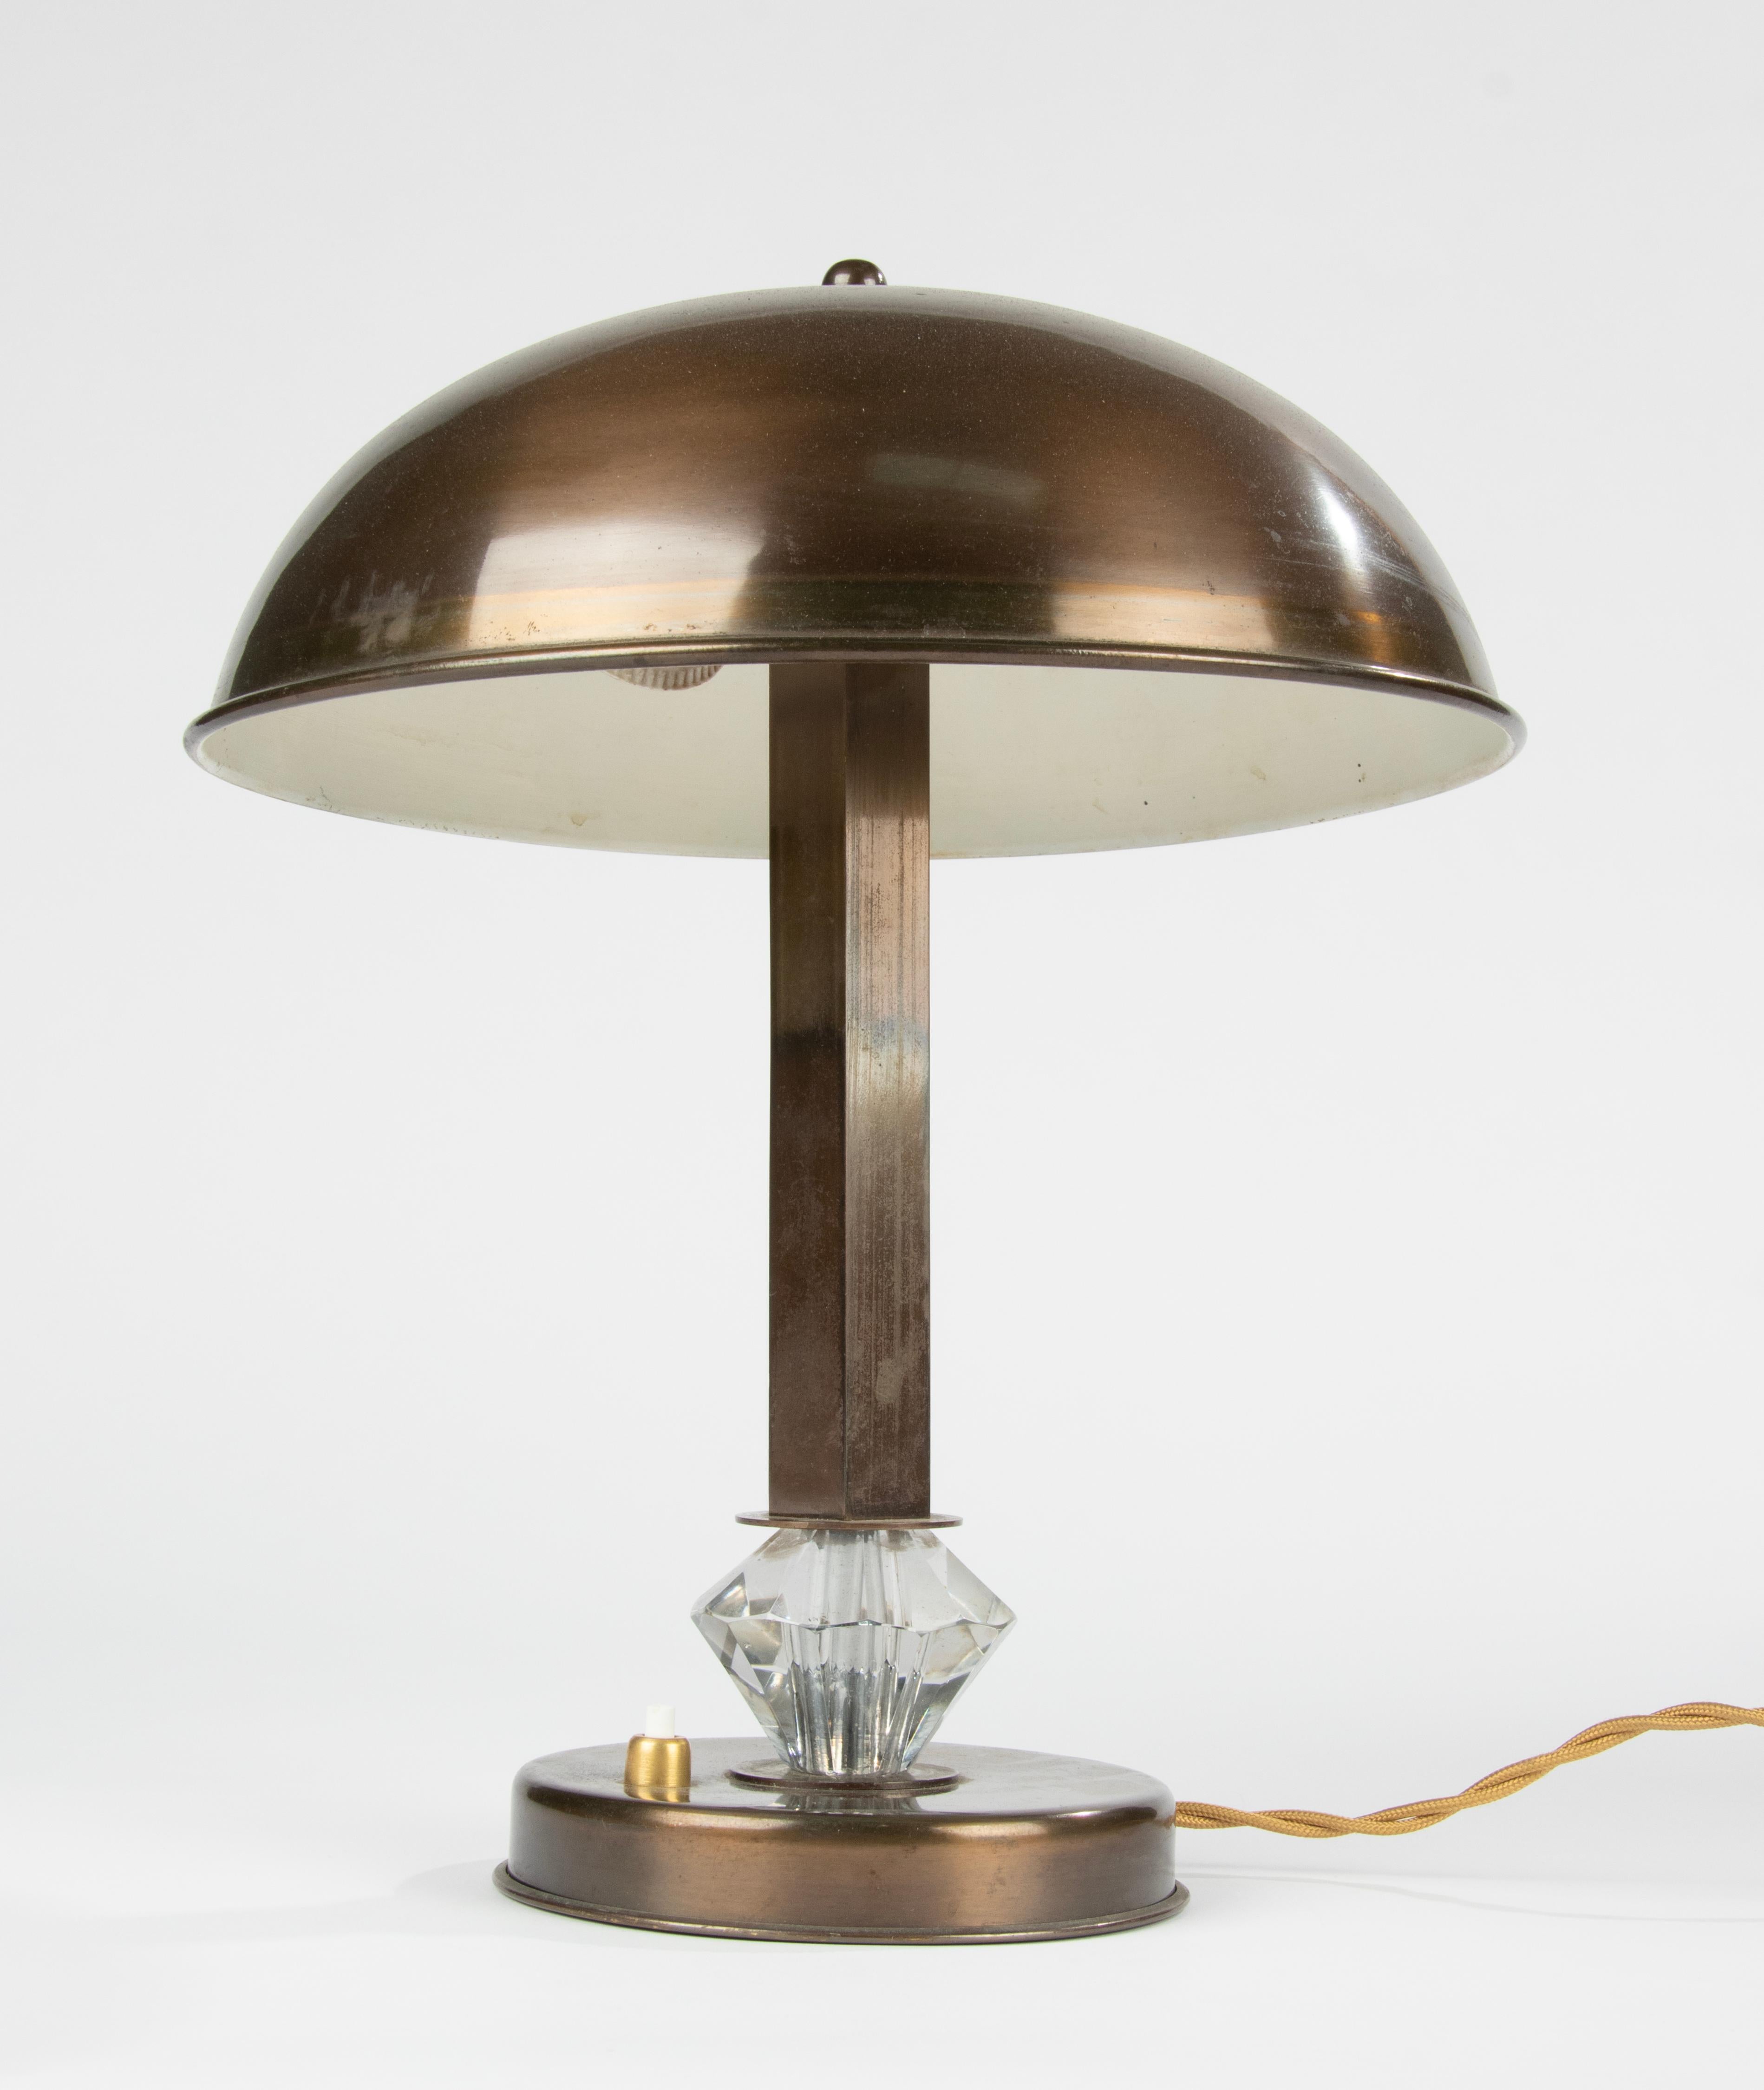 Midcentury Copper Table Mushroom Lamp In Good Condition For Sale In Casteren, Noord-Brabant